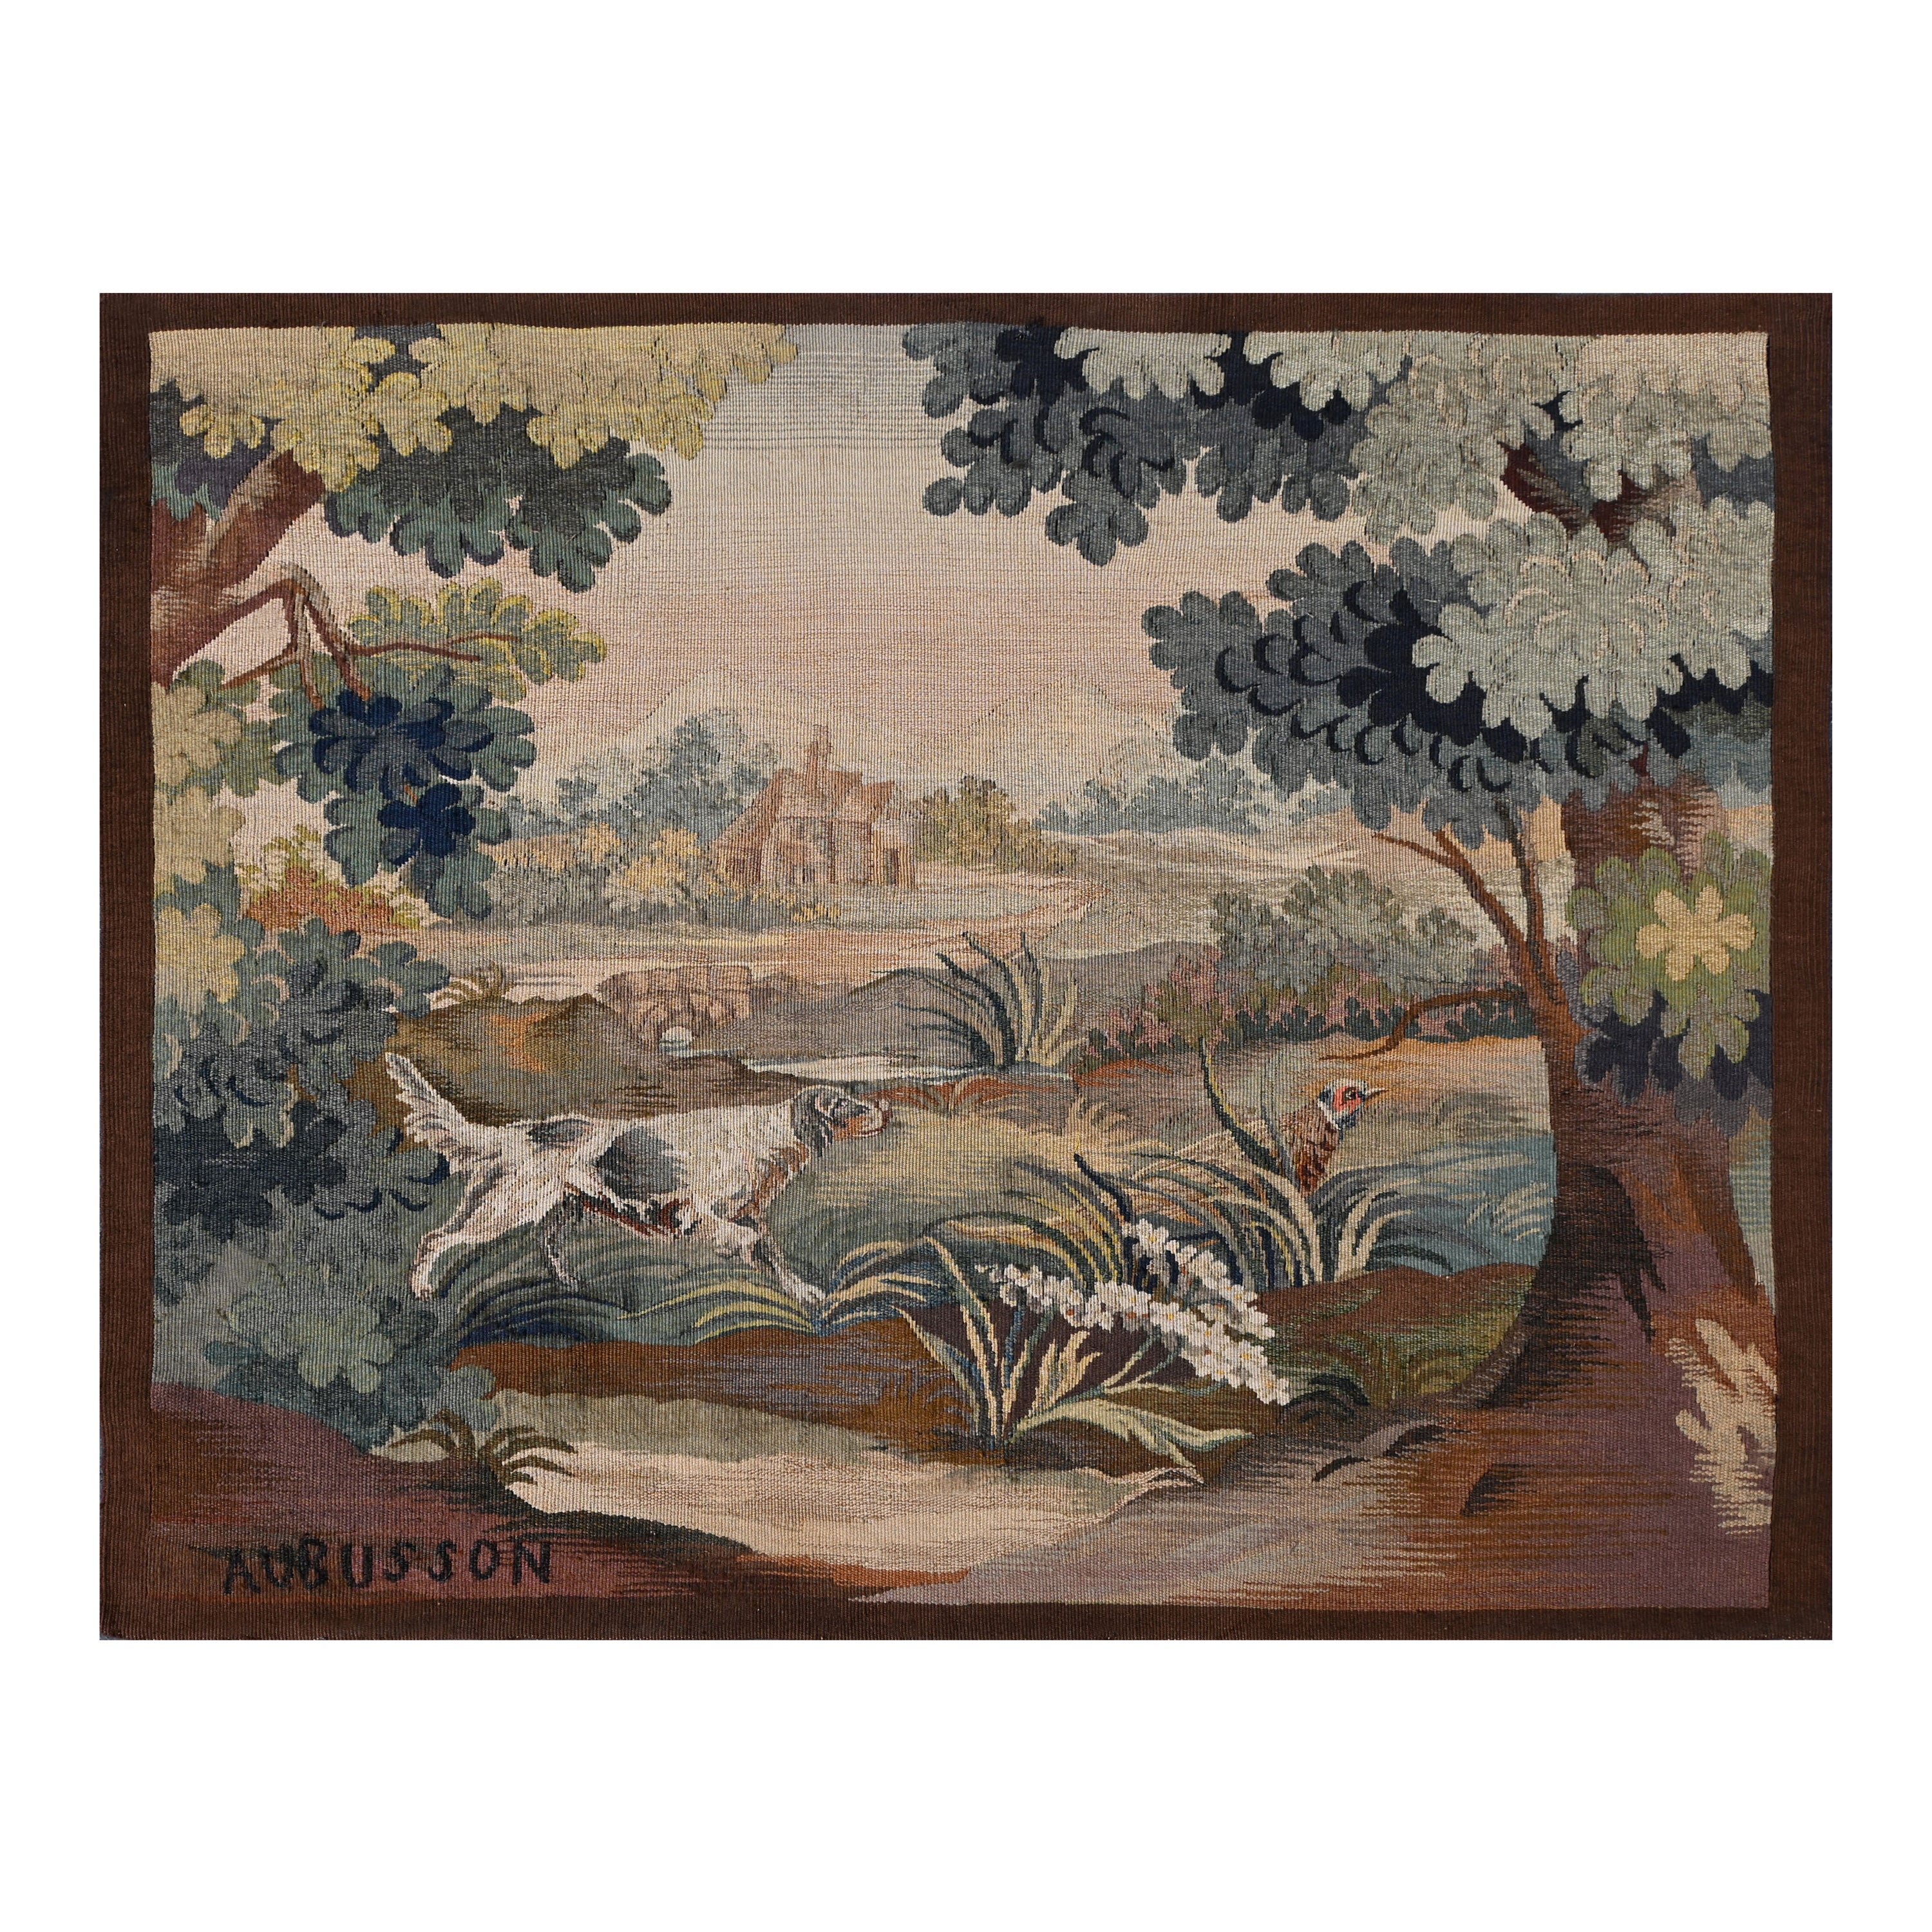 Aubusson Tapestry - The Dog And Pheasant After Jean-baptiste Oudry - N° 1398 For Sale